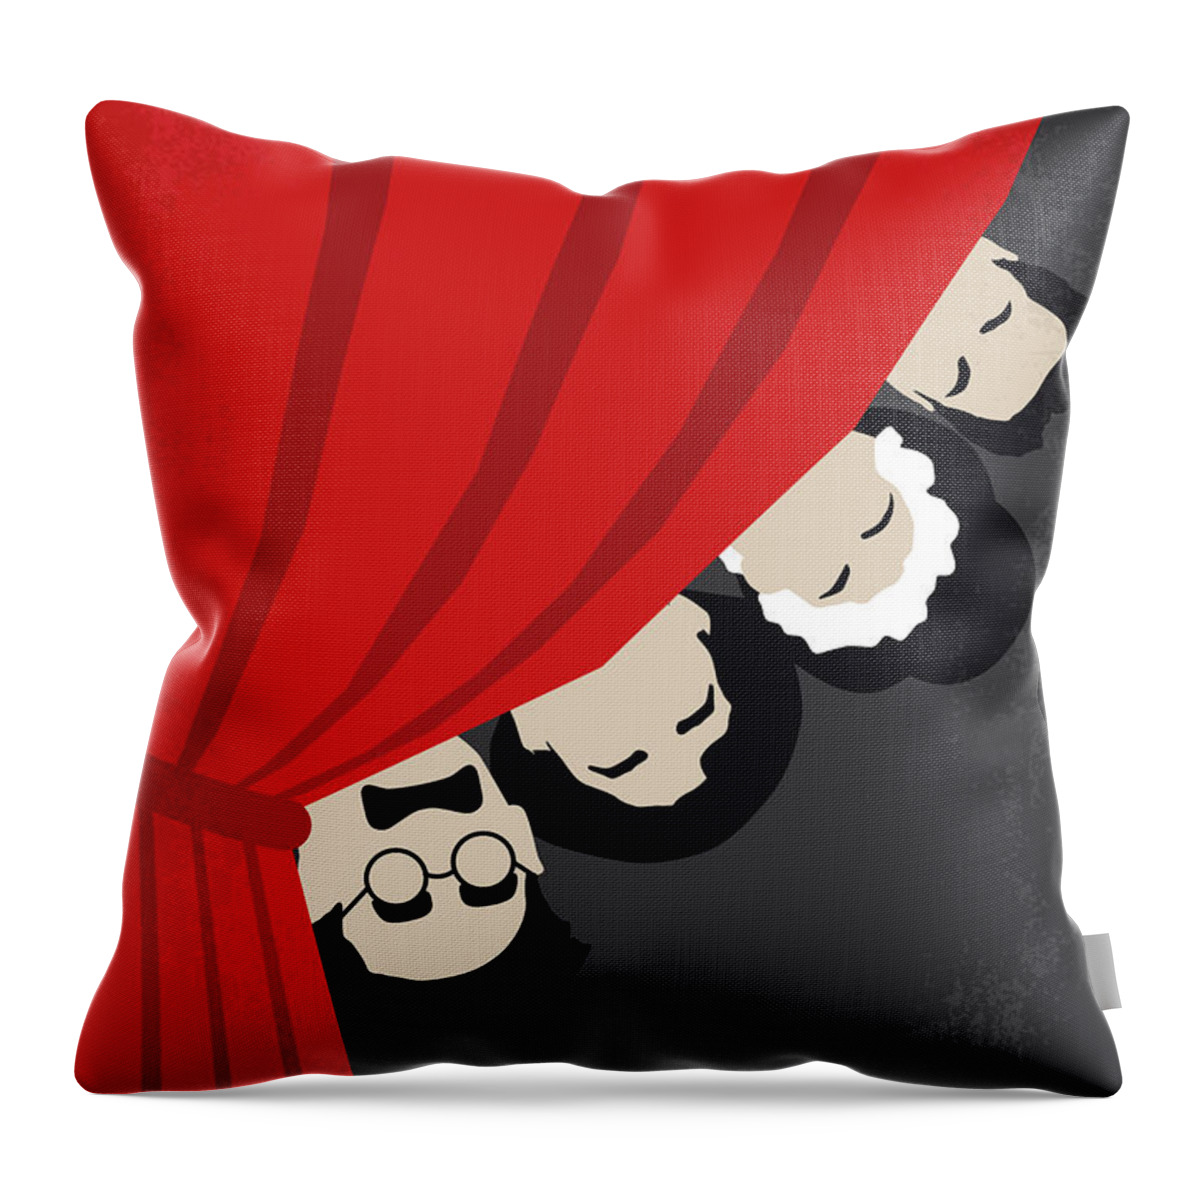 A Night At The Opera Throw Pillow featuring the digital art No1053 My A Night at the Opera minimal movie poster by Chungkong Art